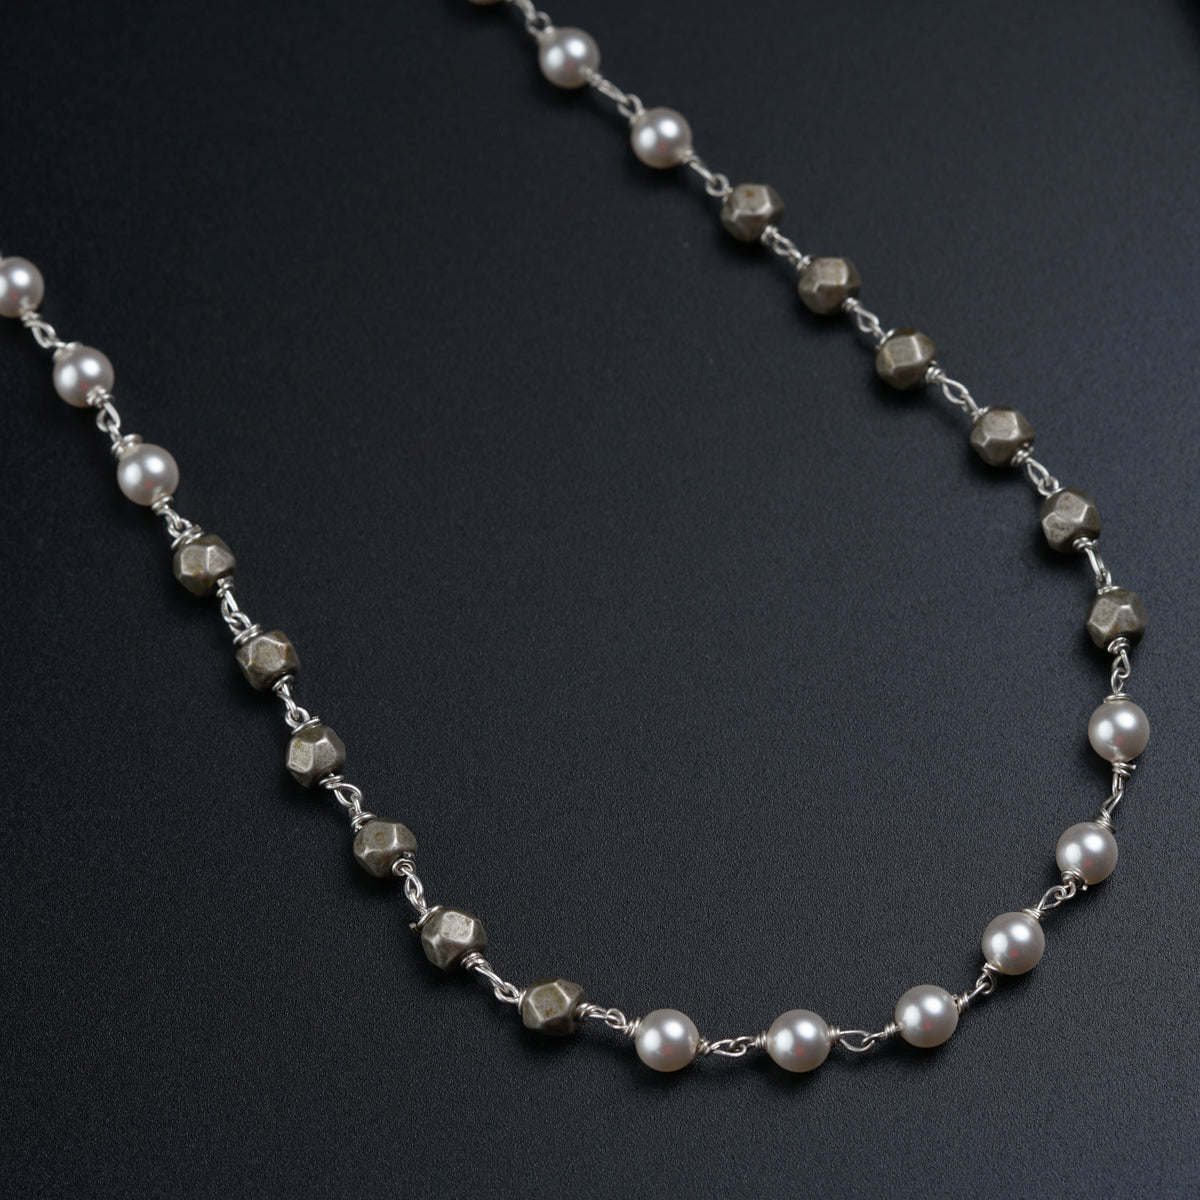 a long necklace with pearls and silver beads